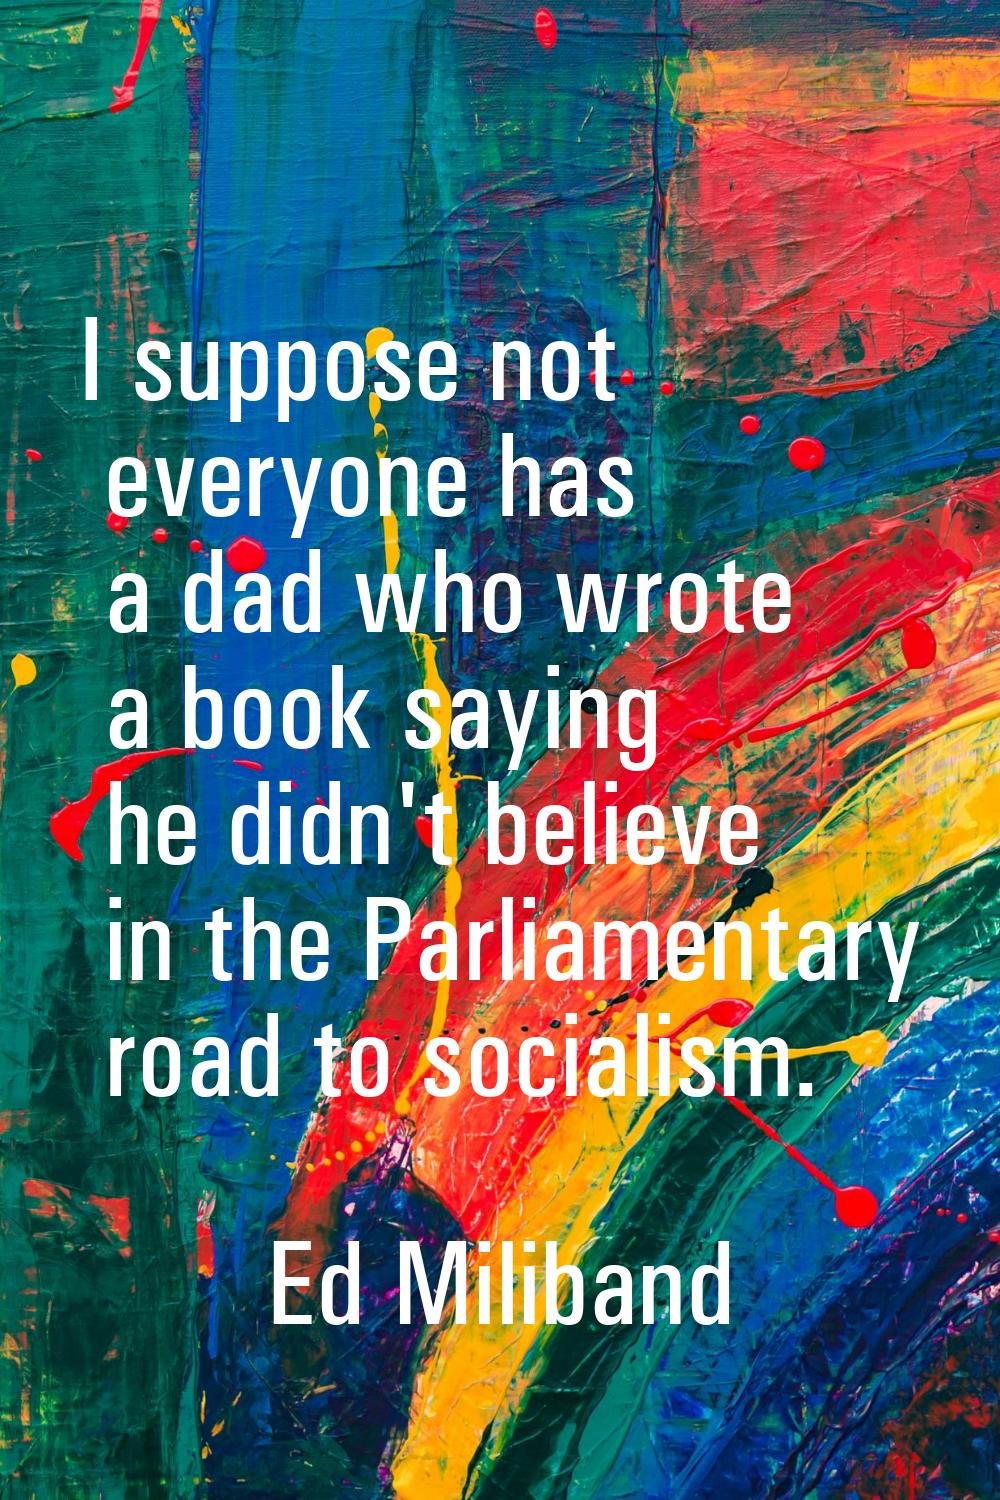 I suppose not everyone has a dad who wrote a book saying he didn't believe in the Parliamentary roa